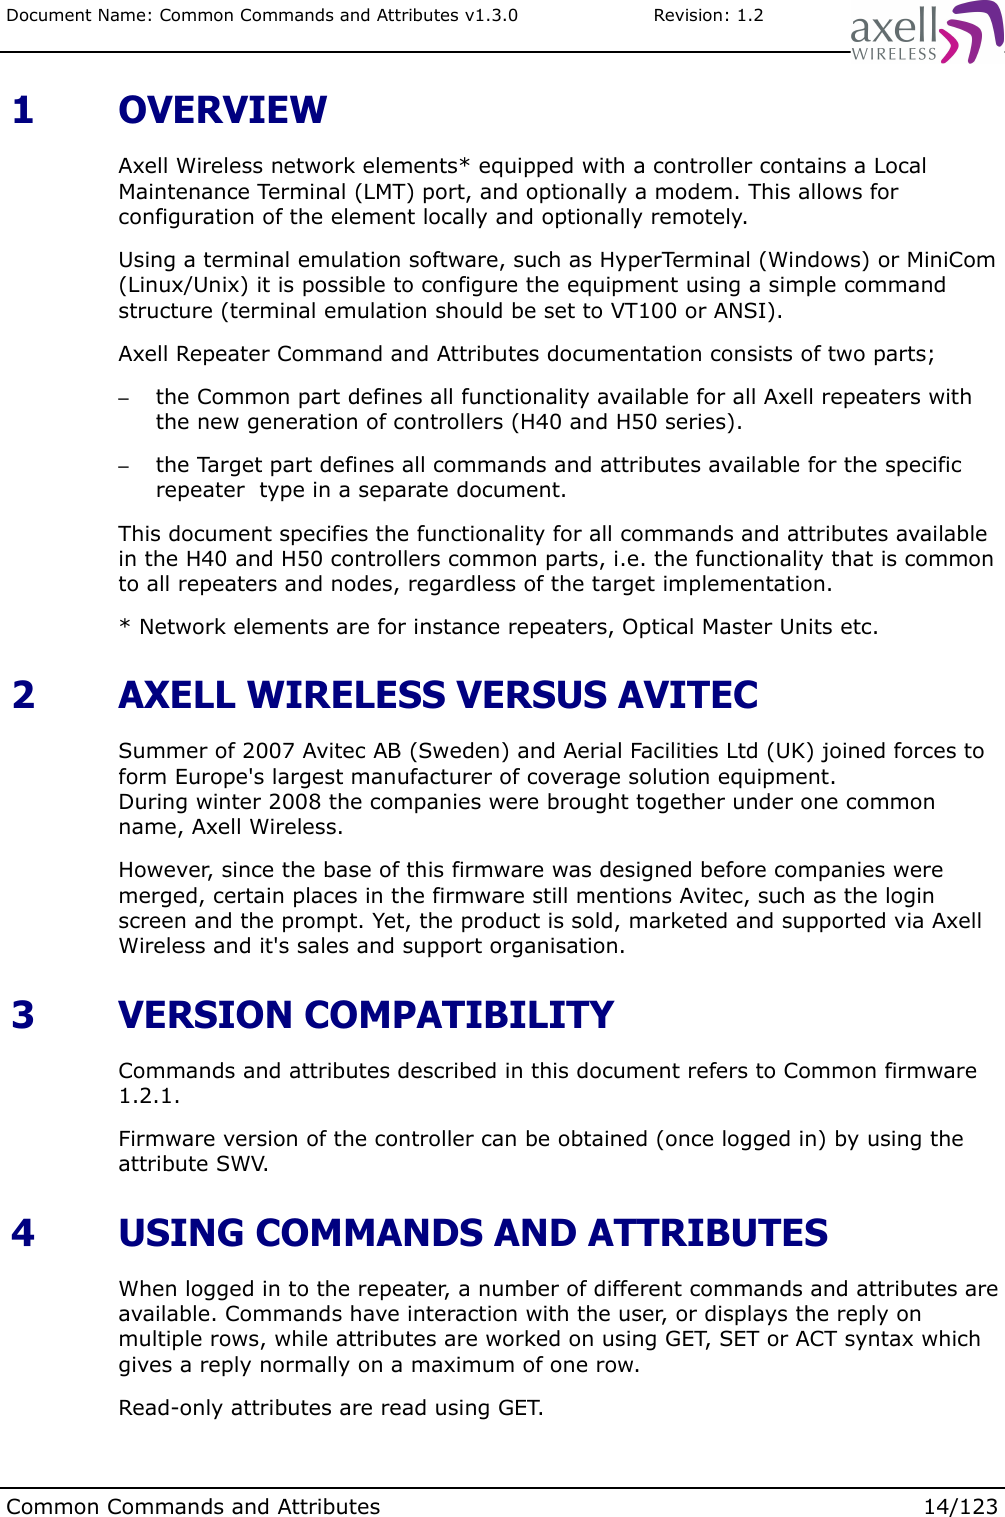 Document Name: Common Commands and Attributes v1.3.0                       Revision: 1.2 1  OVERVIEWAxell Wireless network elements* equipped with a controller contains a Local Maintenance Terminal (LMT) port, and optionally a modem. This allows for configuration of the element locally and optionally remotely. Using a terminal emulation software, such as HyperTerminal (Windows) or MiniCom (Linux/Unix) it is possible to configure the equipment using a simple command structure (terminal emulation should be set to VT100 or ANSI).Axell Repeater Command and Attributes documentation consists of two parts; –the Common part defines all functionality available for all Axell repeaters with the new generation of controllers (H40 and H50 series).–the Target part defines all commands and attributes available for the specific repeater  type in a separate document.This document specifies the functionality for all commands and attributes available in the H40 and H50 controllers common parts, i.e. the functionality that is common to all repeaters and nodes, regardless of the target implementation.* Network elements are for instance repeaters, Optical Master Units etc. 2  AXELL WIRELESS VERSUS AVITECSummer of 2007 Avitec AB (Sweden) and Aerial Facilities Ltd (UK) joined forces to form Europe&apos;s largest manufacturer of coverage solution equipment. During winter 2008 the companies were brought together under one common name, Axell Wireless.However, since the base of this firmware was designed before companies were merged, certain places in the firmware still mentions Avitec, such as the login screen and the prompt. Yet, the product is sold, marketed and supported via Axell Wireless and it&apos;s sales and support organisation. 3  VERSION COMPATIBILITYCommands and attributes described in this document refers to Common firmware 1.2.1.Firmware version of the controller can be obtained (once logged in) by using the attribute SWV.  4  USING COMMANDS AND ATTRIBUTESWhen logged in to the repeater, a number of different commands and attributes are available. Commands have interaction with the user, or displays the reply on multiple rows, while attributes are worked on using GET, SET or ACT syntax which gives a reply normally on a maximum of one row.Read-only attributes are read using GET.Common Commands and Attributes 14/123